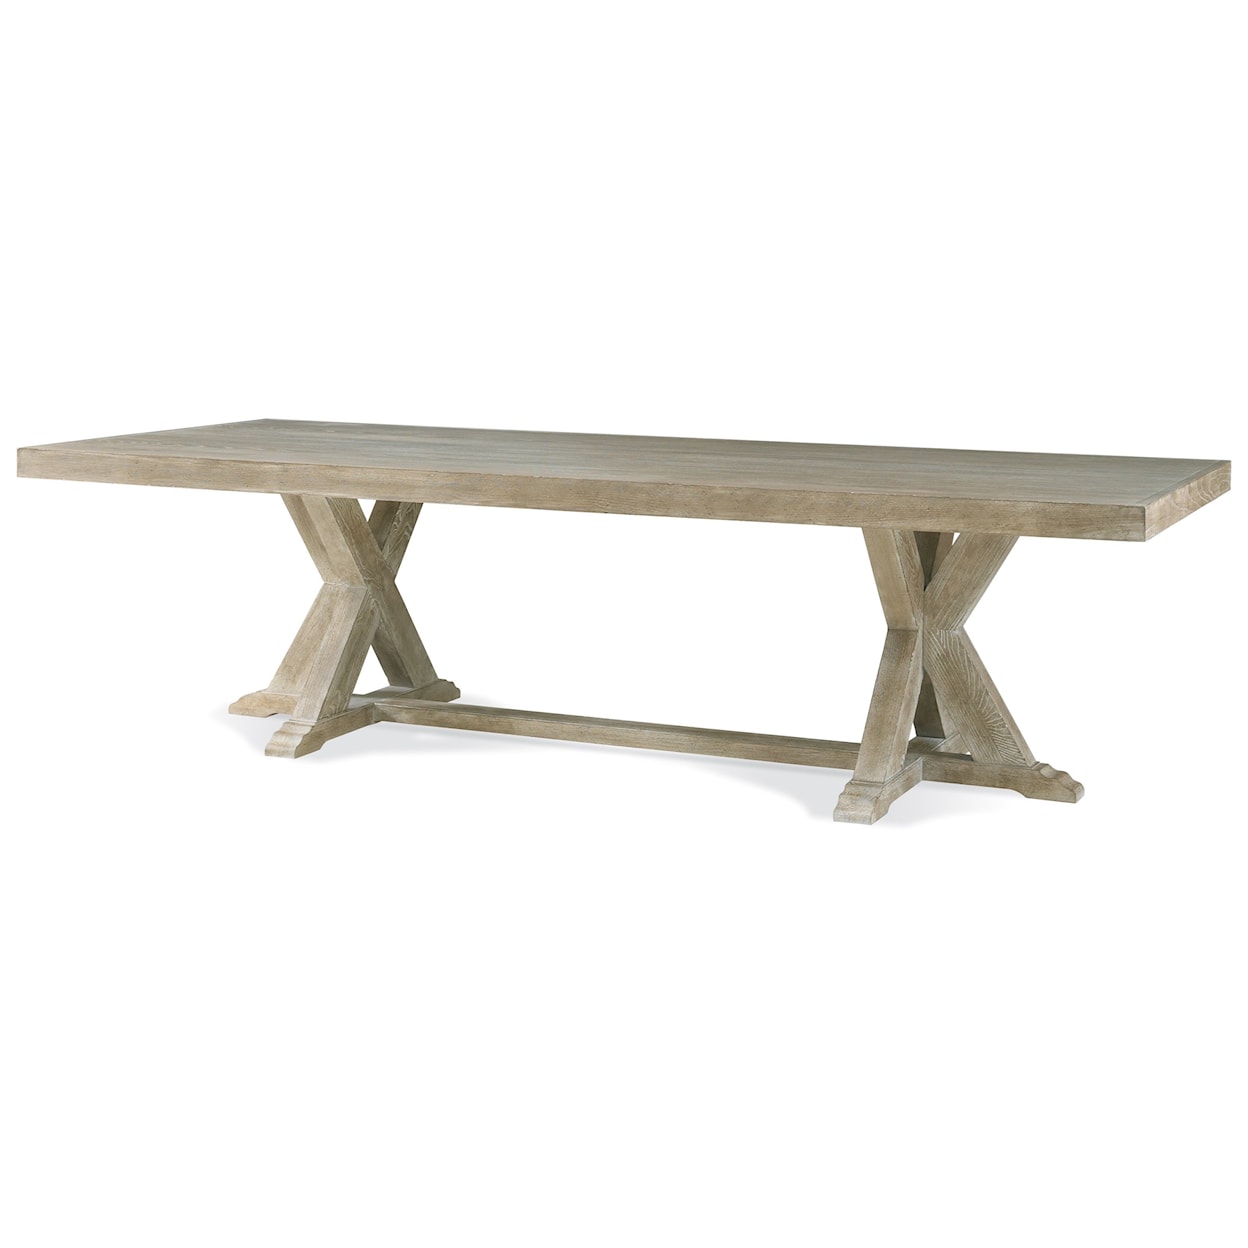 Hickory White Urban Loft Collection Rectangular Dining Table